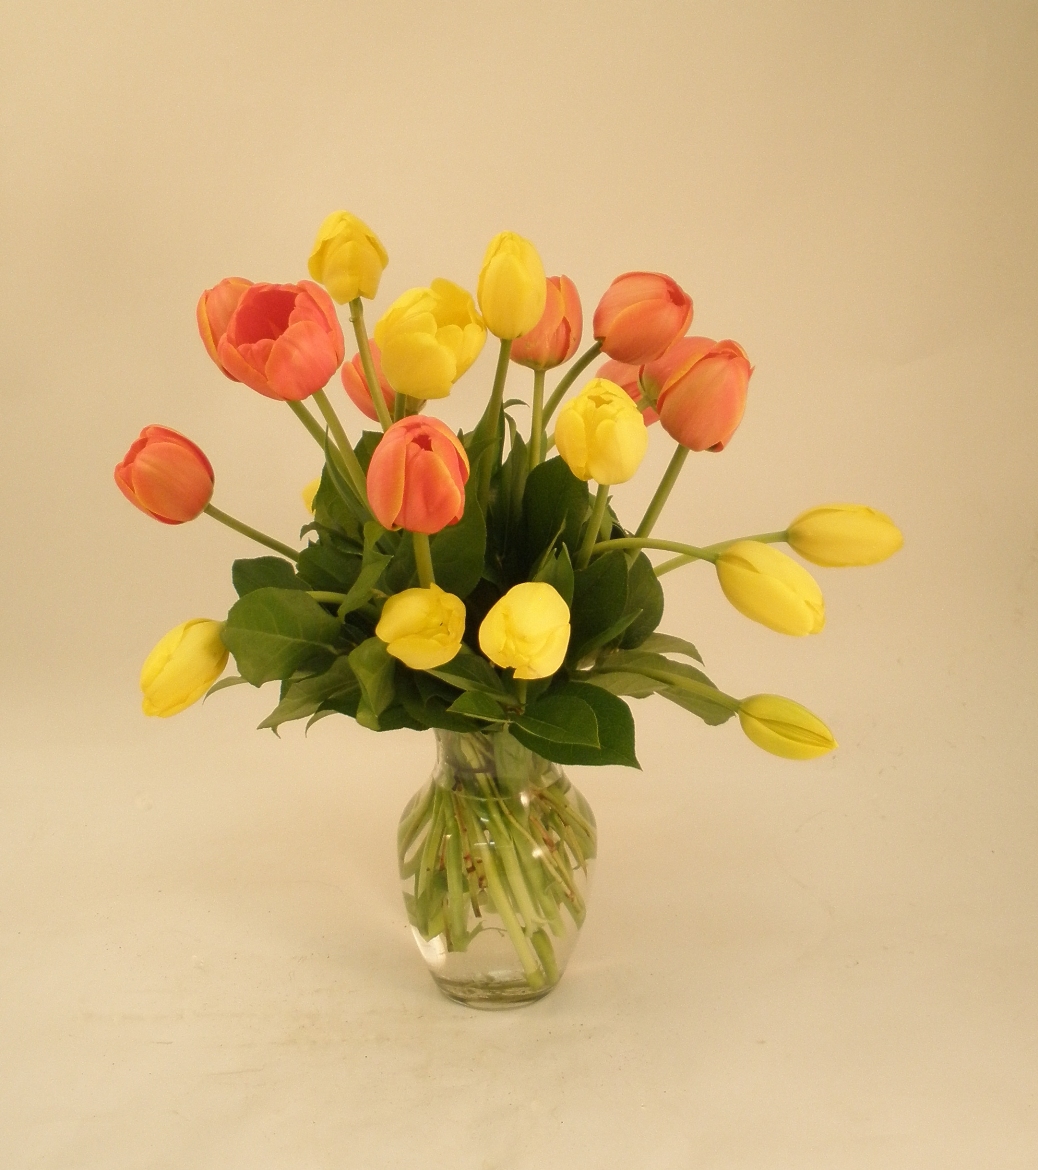 Spring Tulips on sale for January